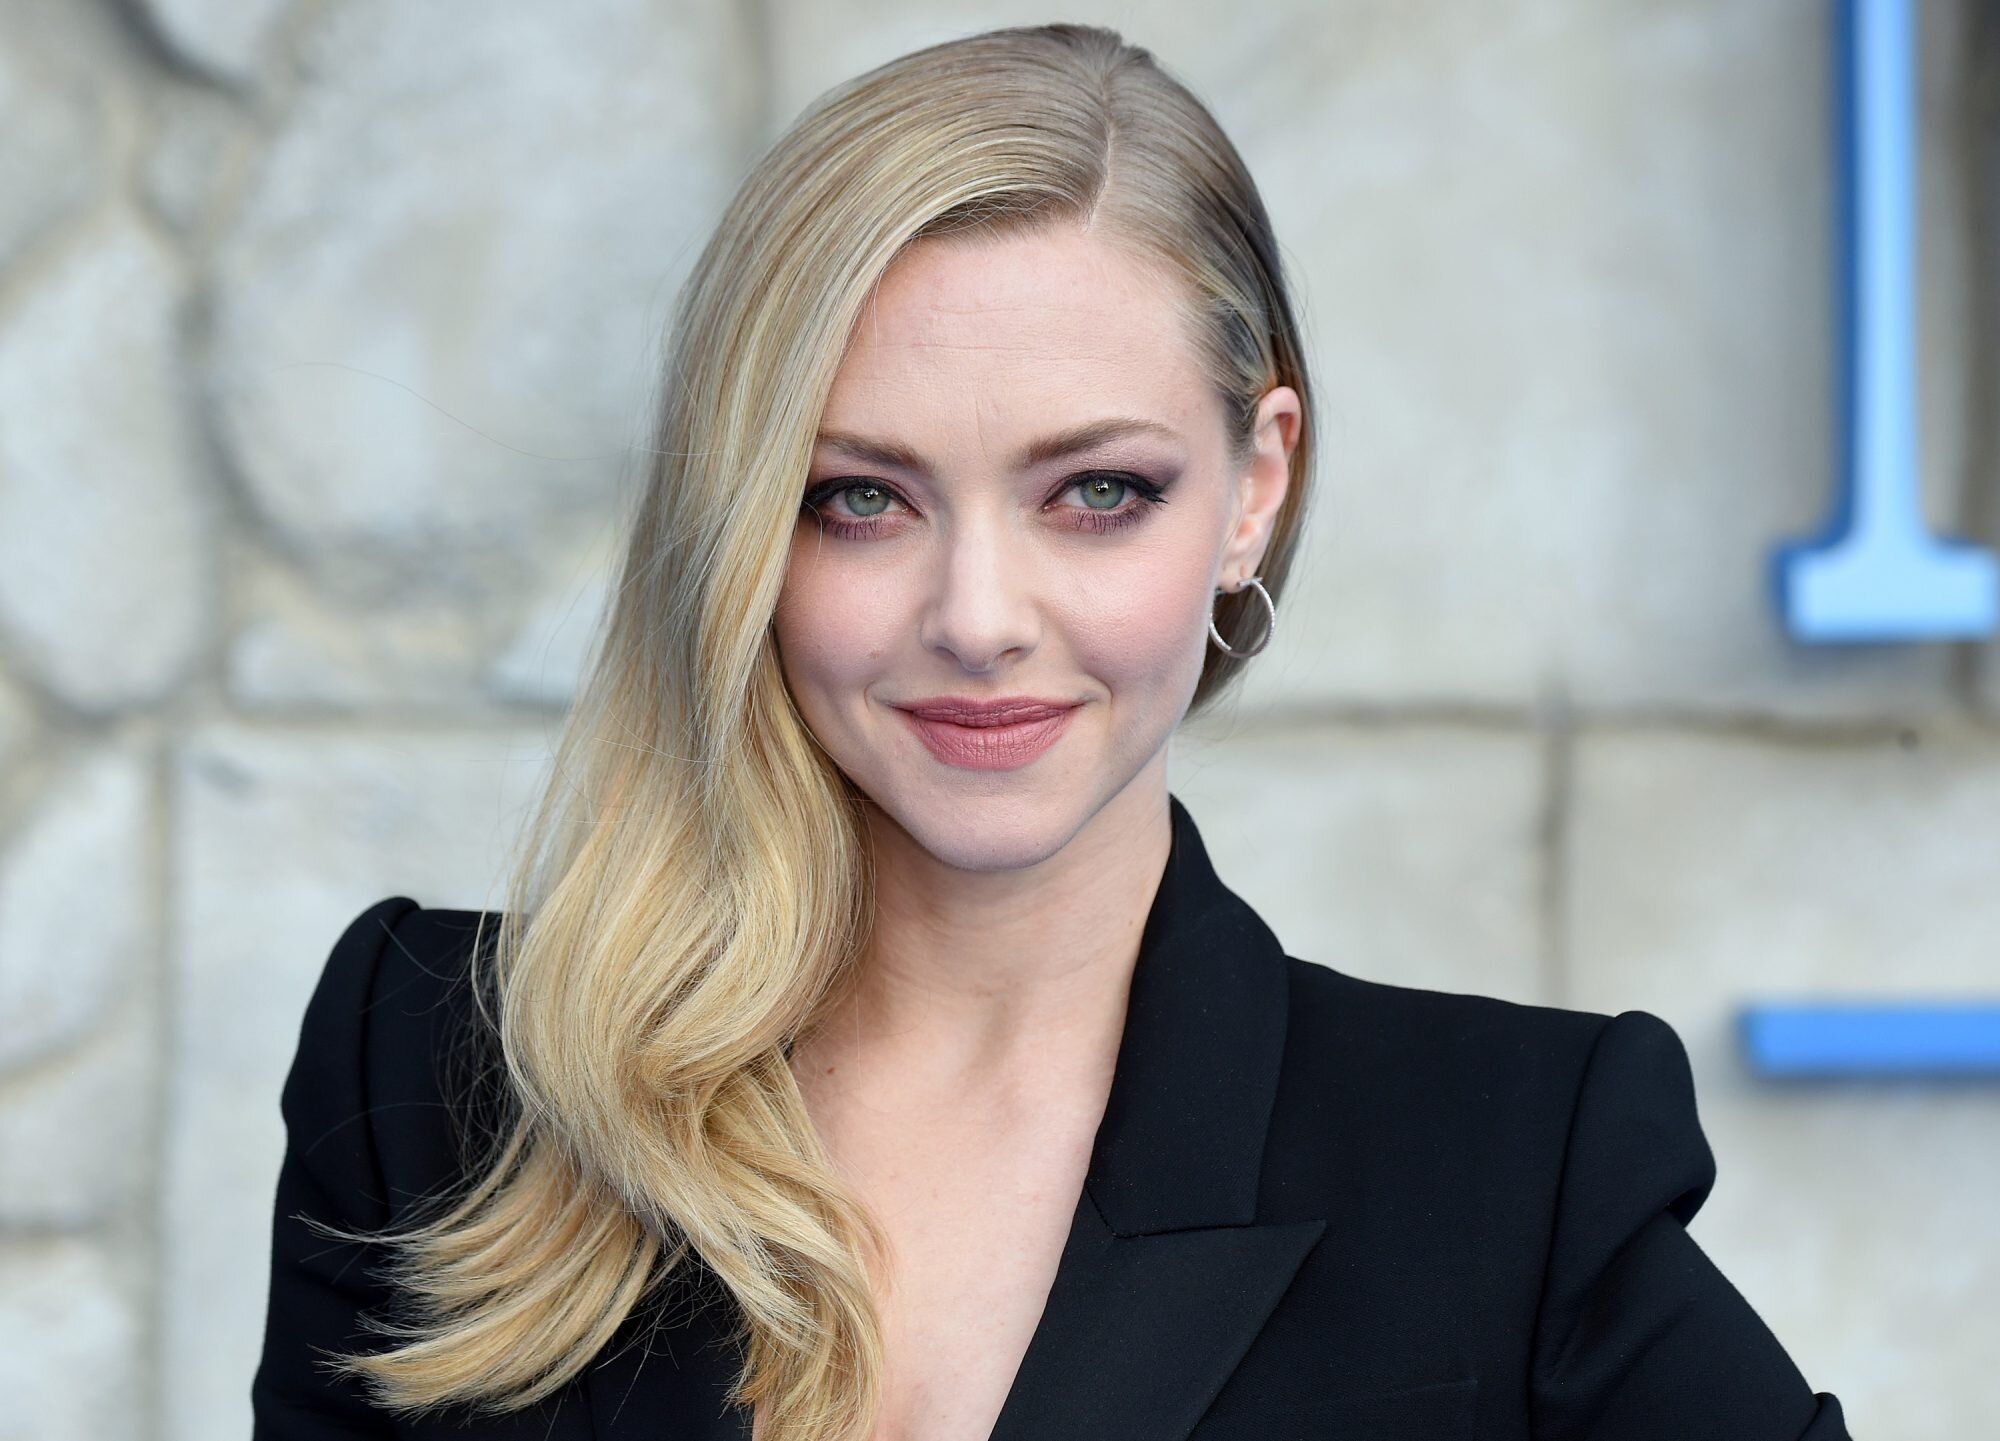 Amanda Seyfried Wiki, Bio, Age, Net Worth, and Other Facts